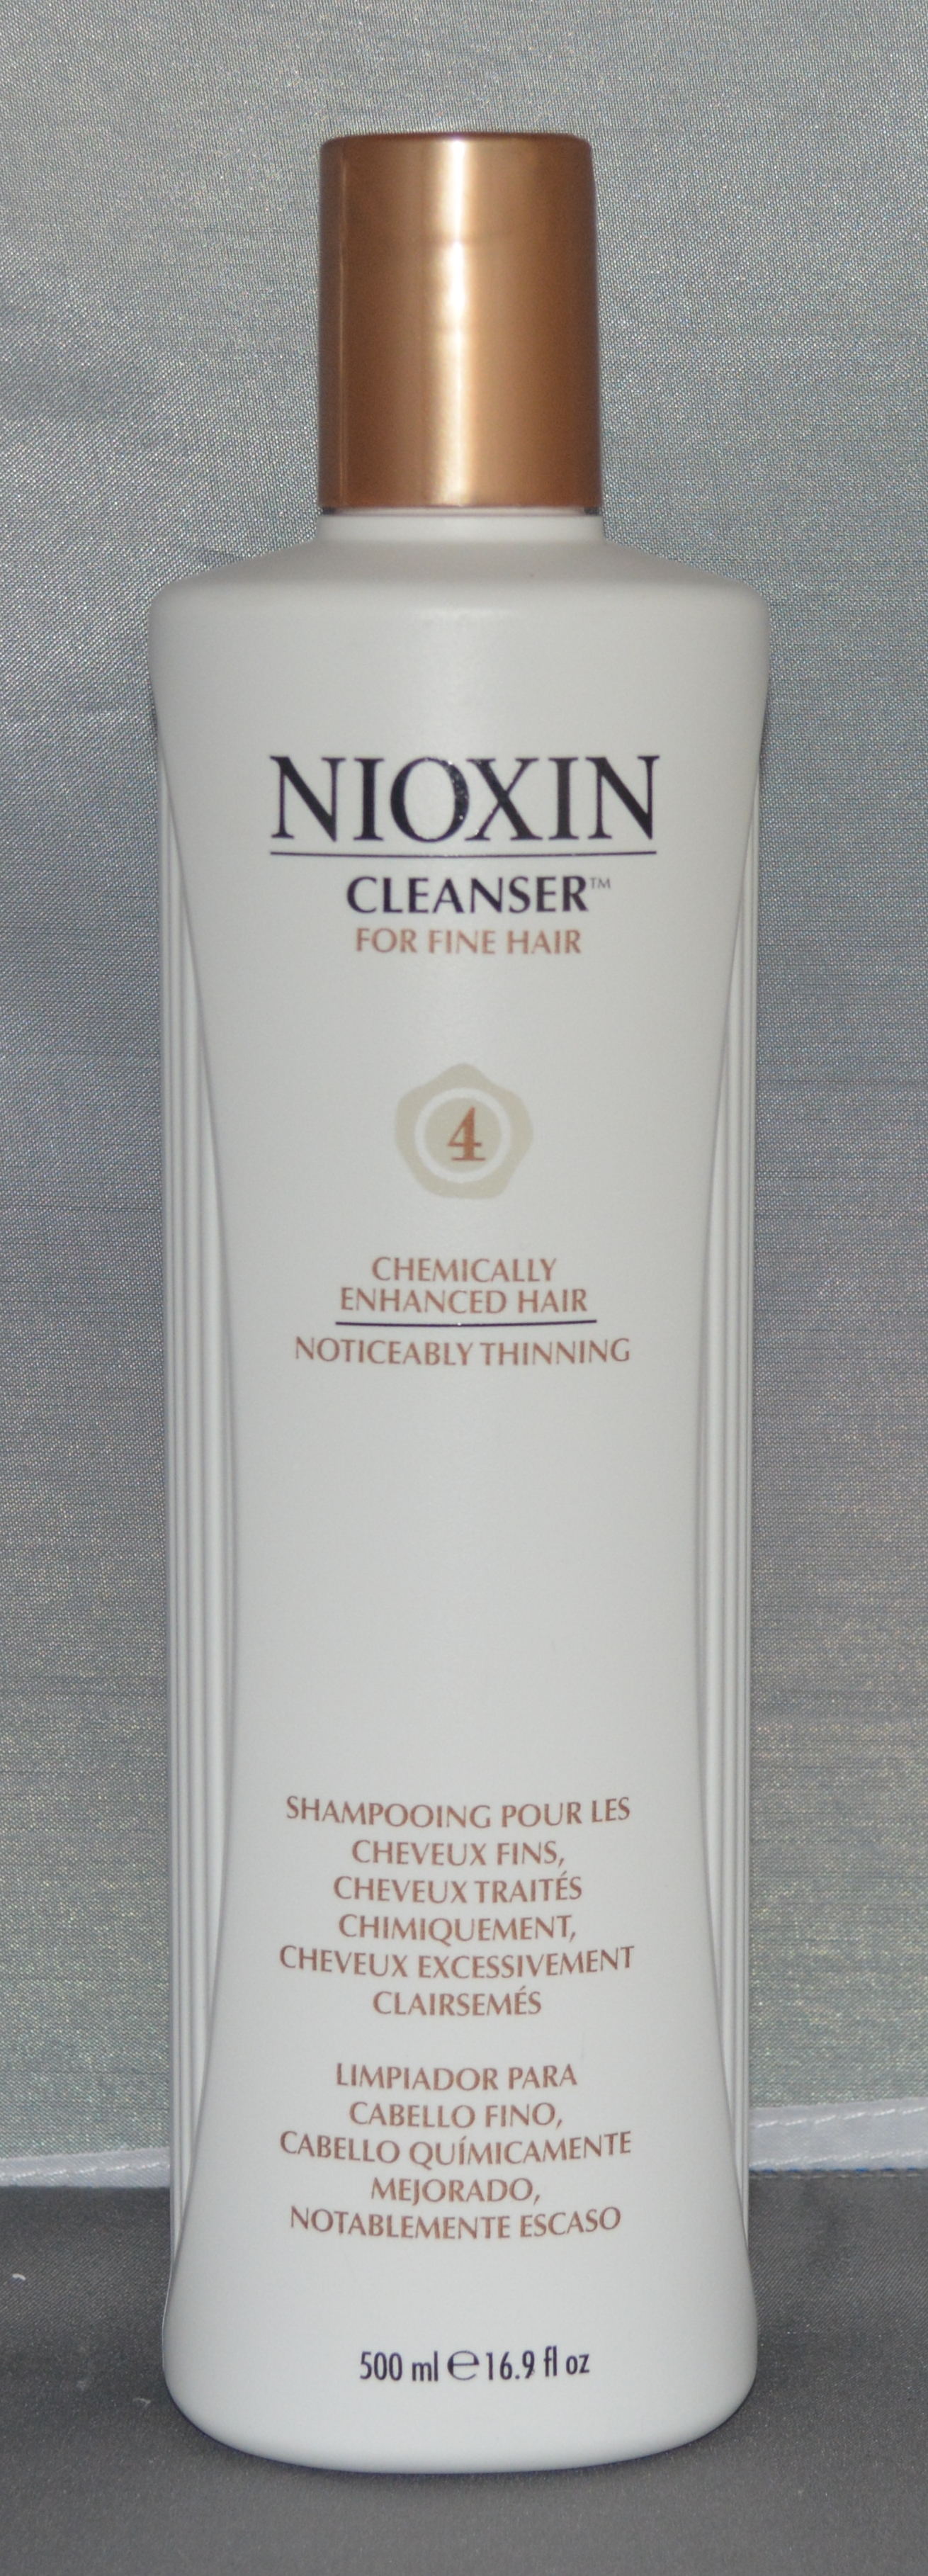 Nioxin Cleanser System 4 Fine/Treated/Noticeably Thinning Hair 16.9 oz